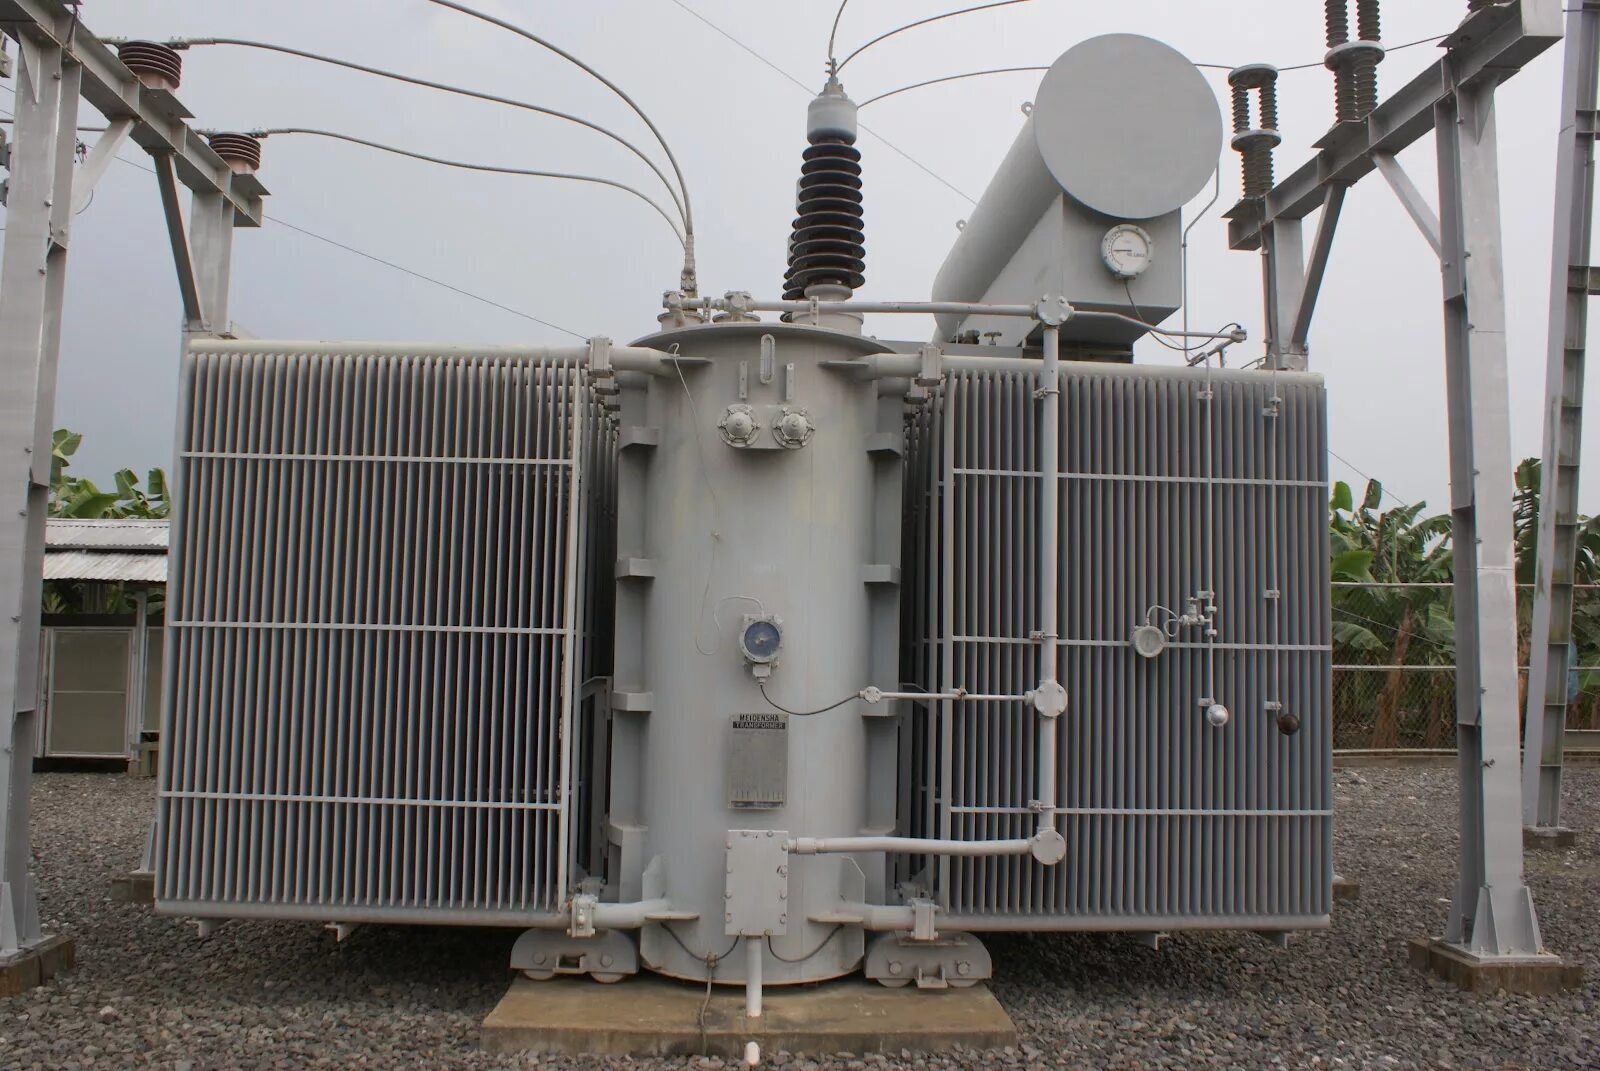 Electric transformers. Distribution & Power Transformer. Power Transformer Compact. Transformer electrical. Electricity Transformer.